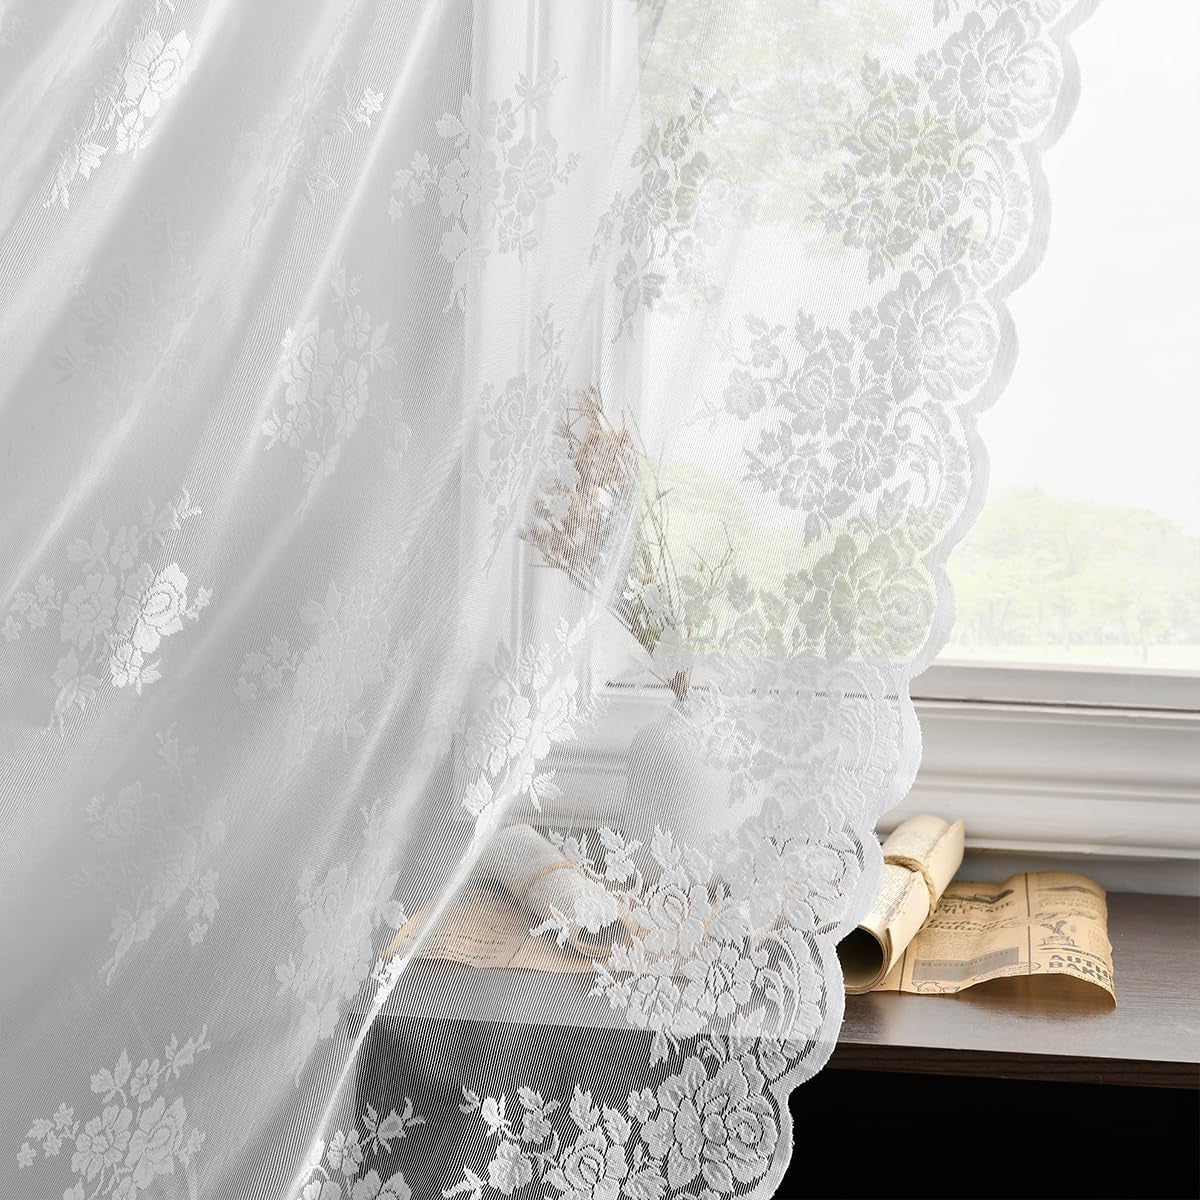 Kotile Sage Green Sheer Valance Curtain for Windows, Rustic Floral Spring Sheer Window Valance Curtain 18 Inch Length, Light Filtering Rod Pocket Lace Valance, 52 X 18 Inch, 1 Panel, Sage Green  Kotile Textile White 52 In X 96 In (W X L) 